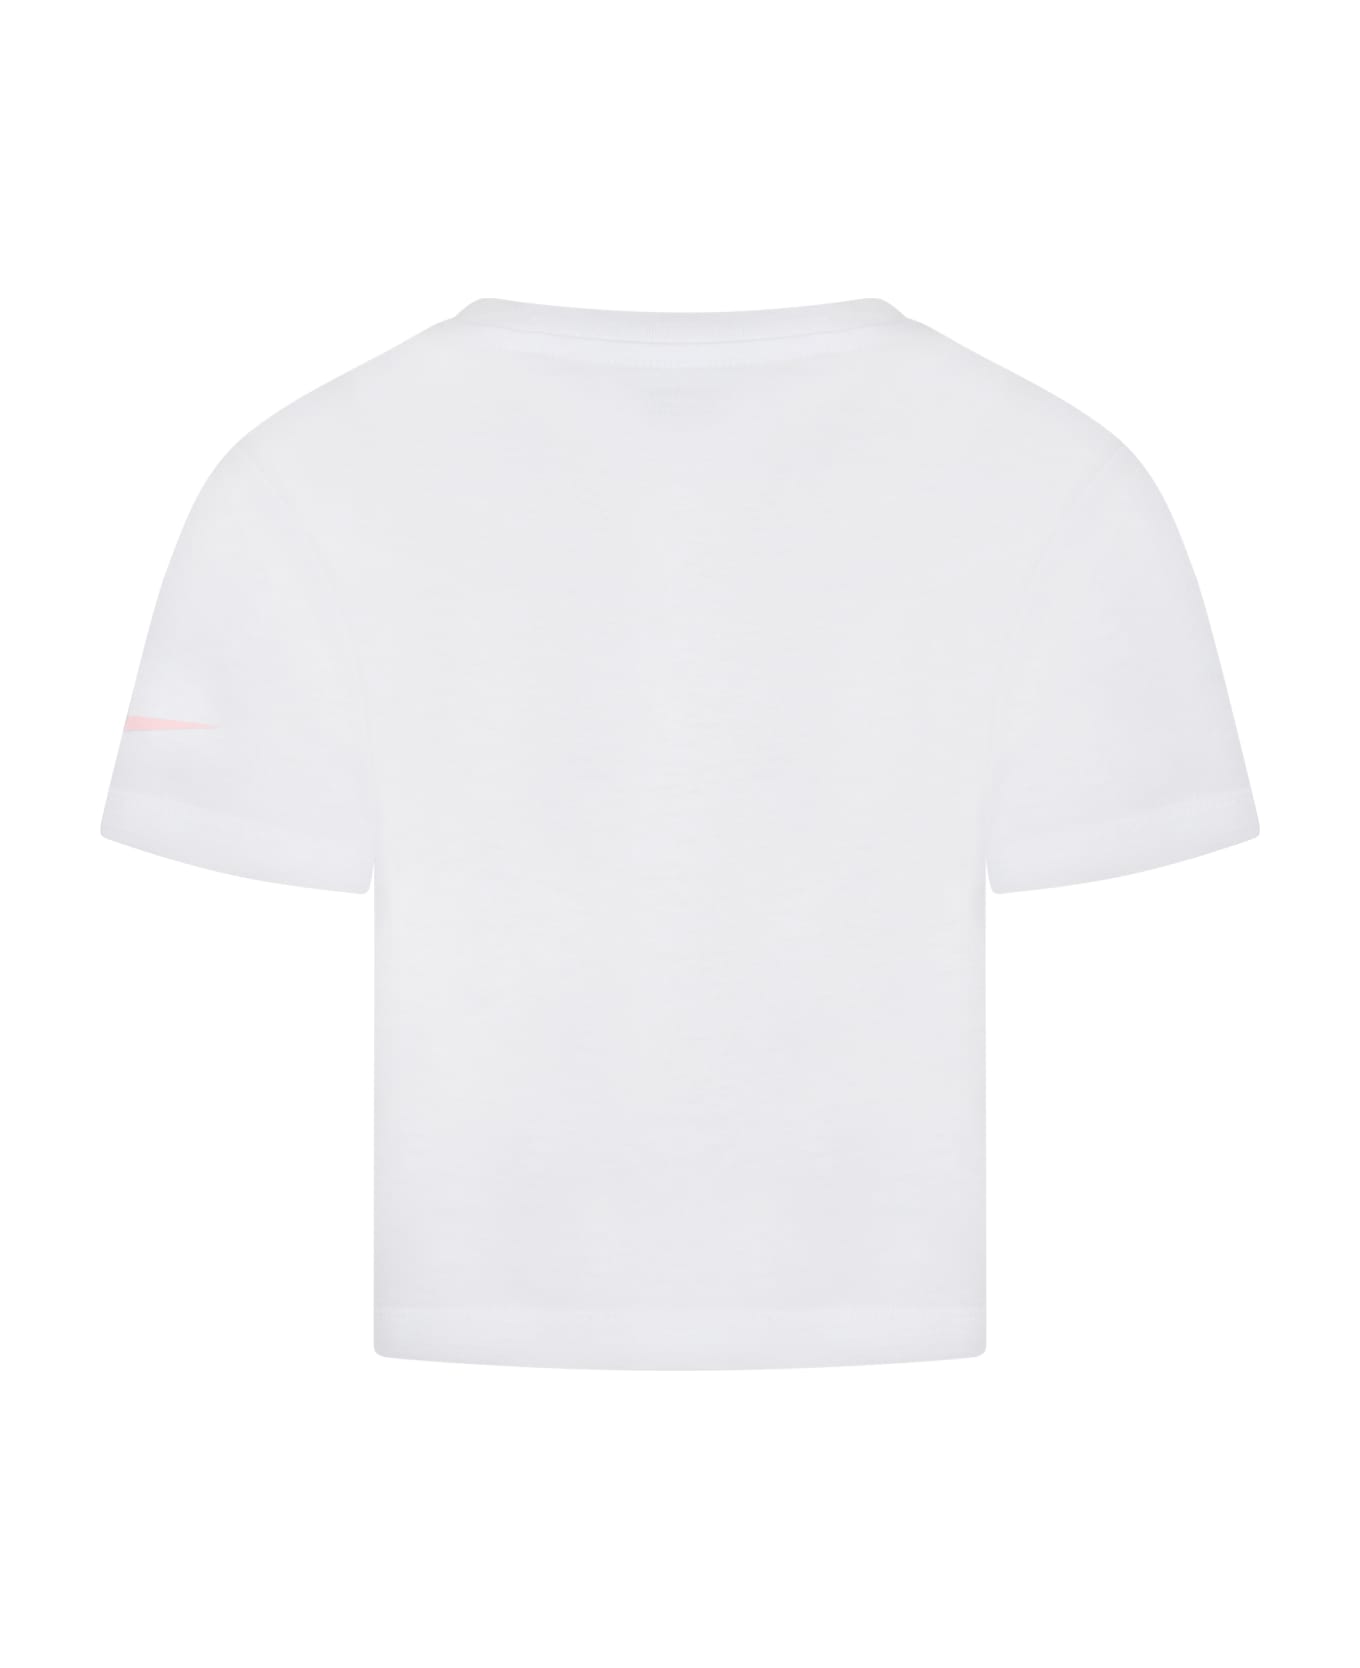 Nike White T-shirt For Girl With Iconic Swoosh - White